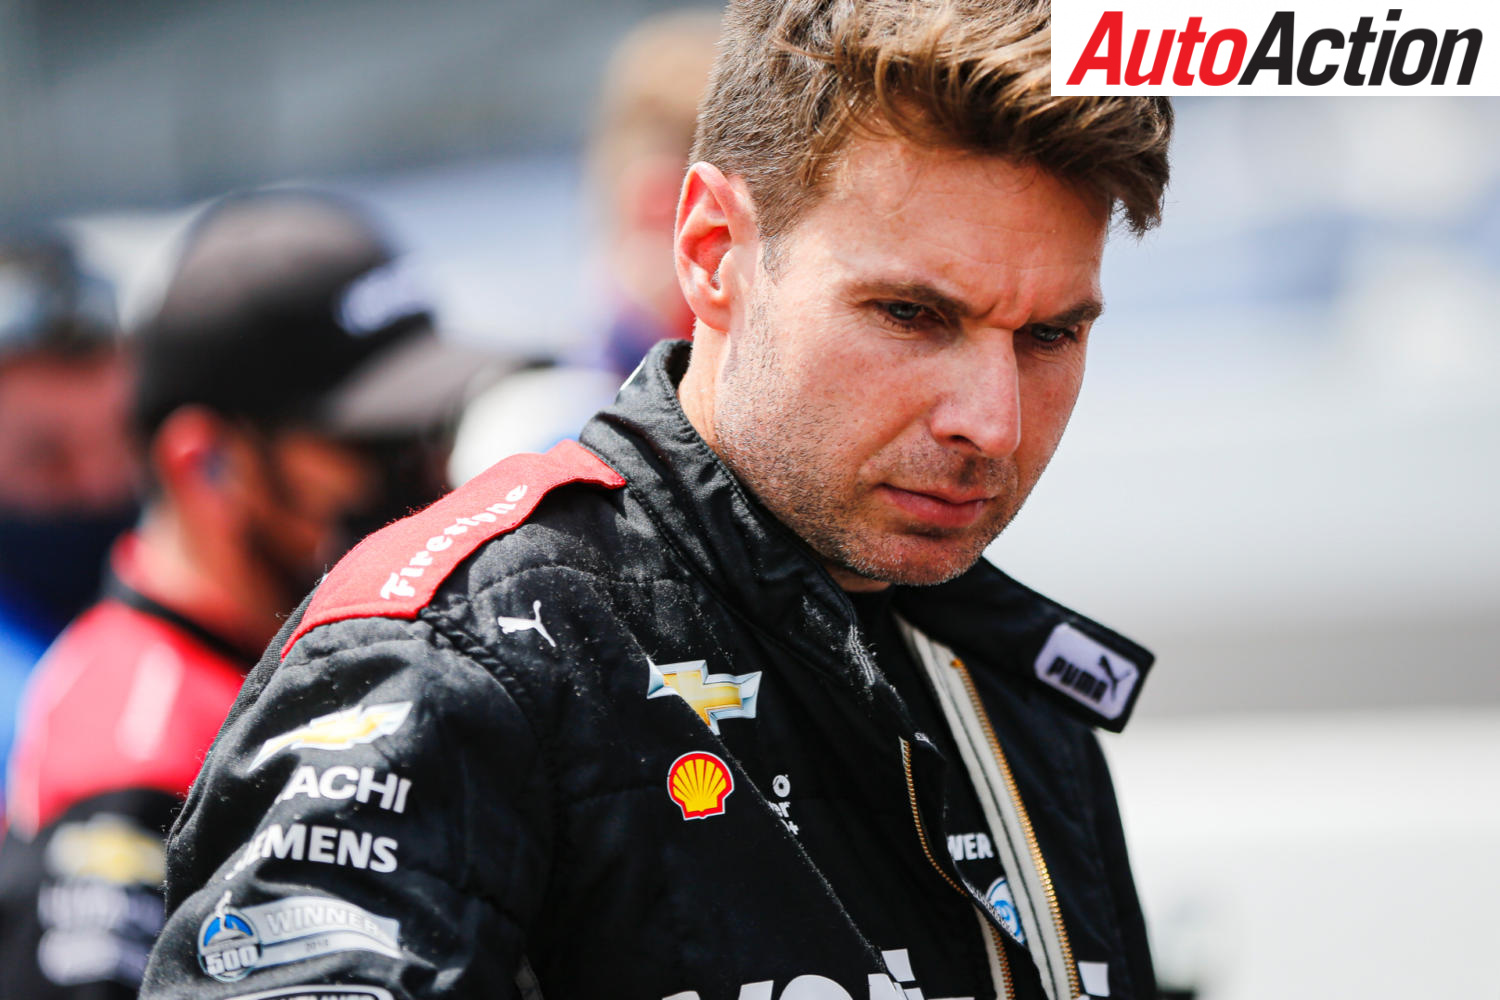 Go-time for Will Power - Image: Motorsport Images